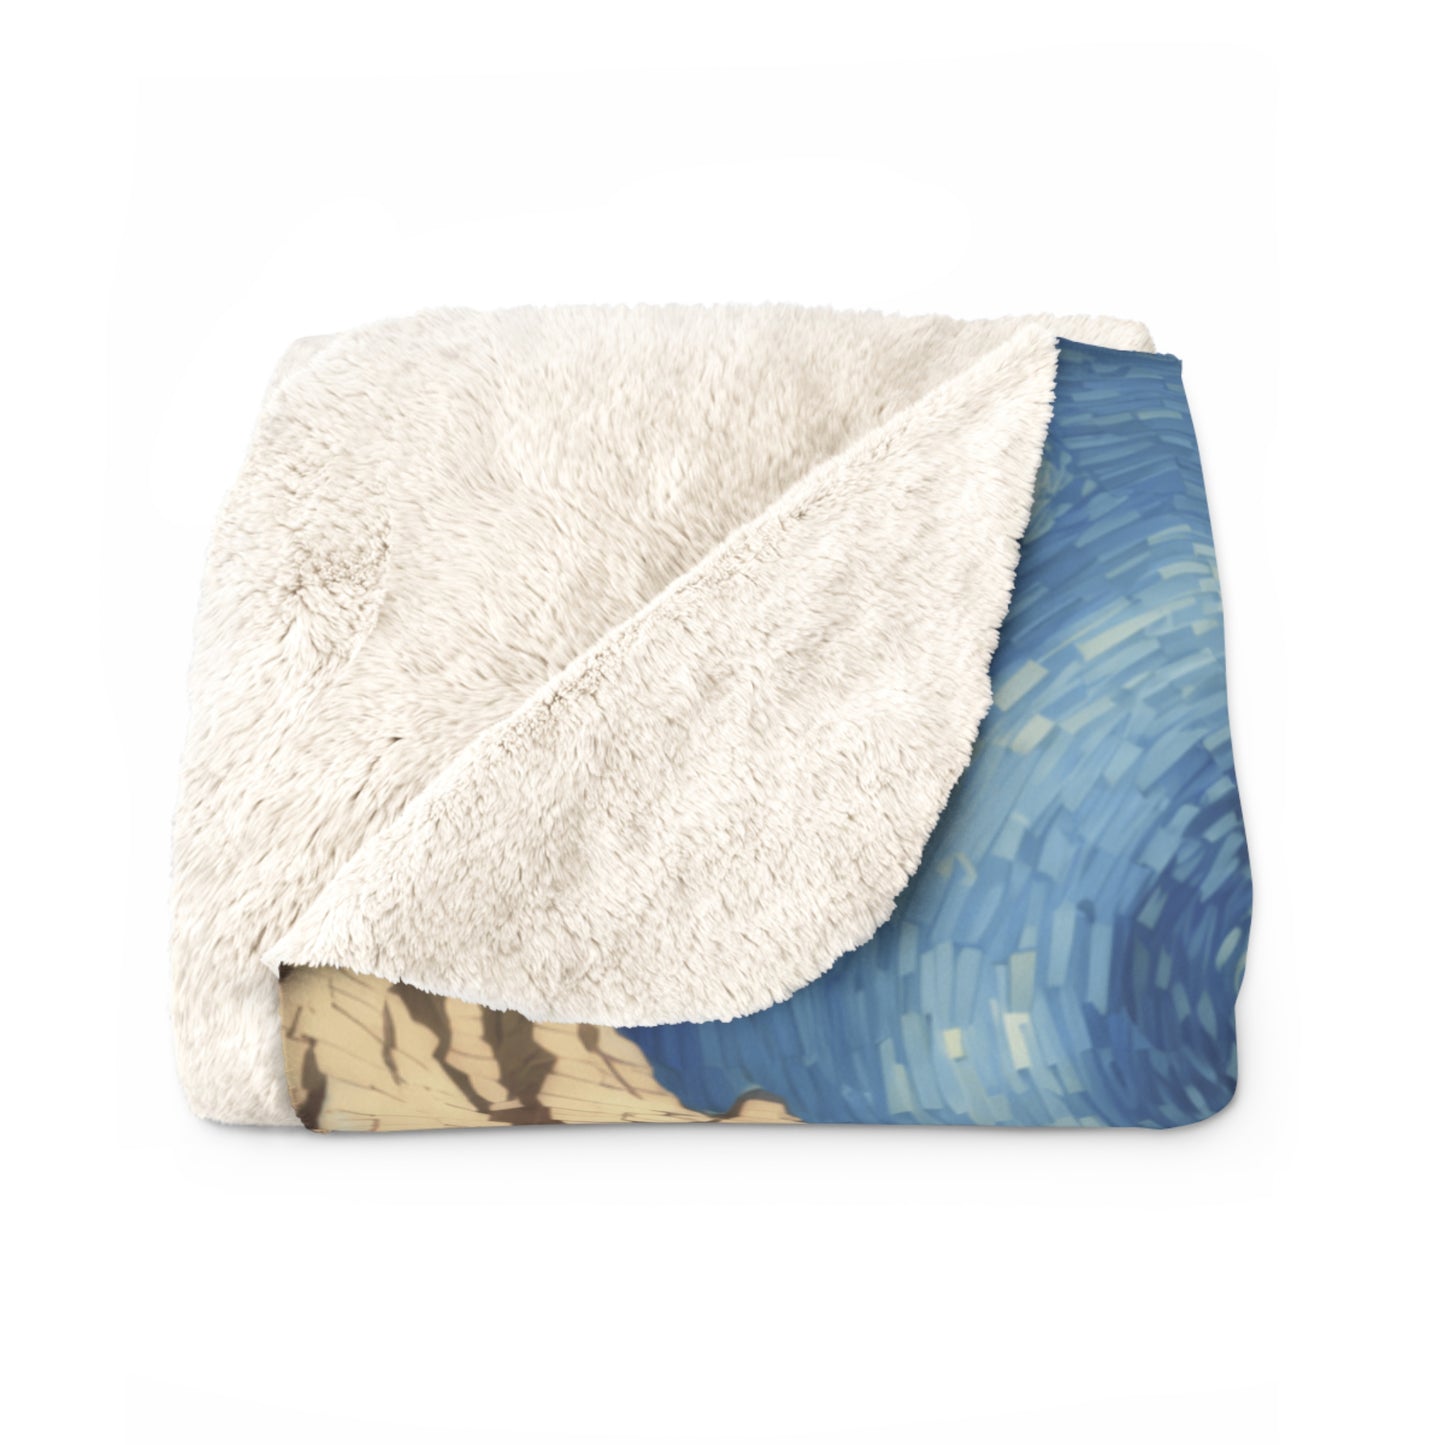 Zion National Park Sherpa Blanket - The Starry Night